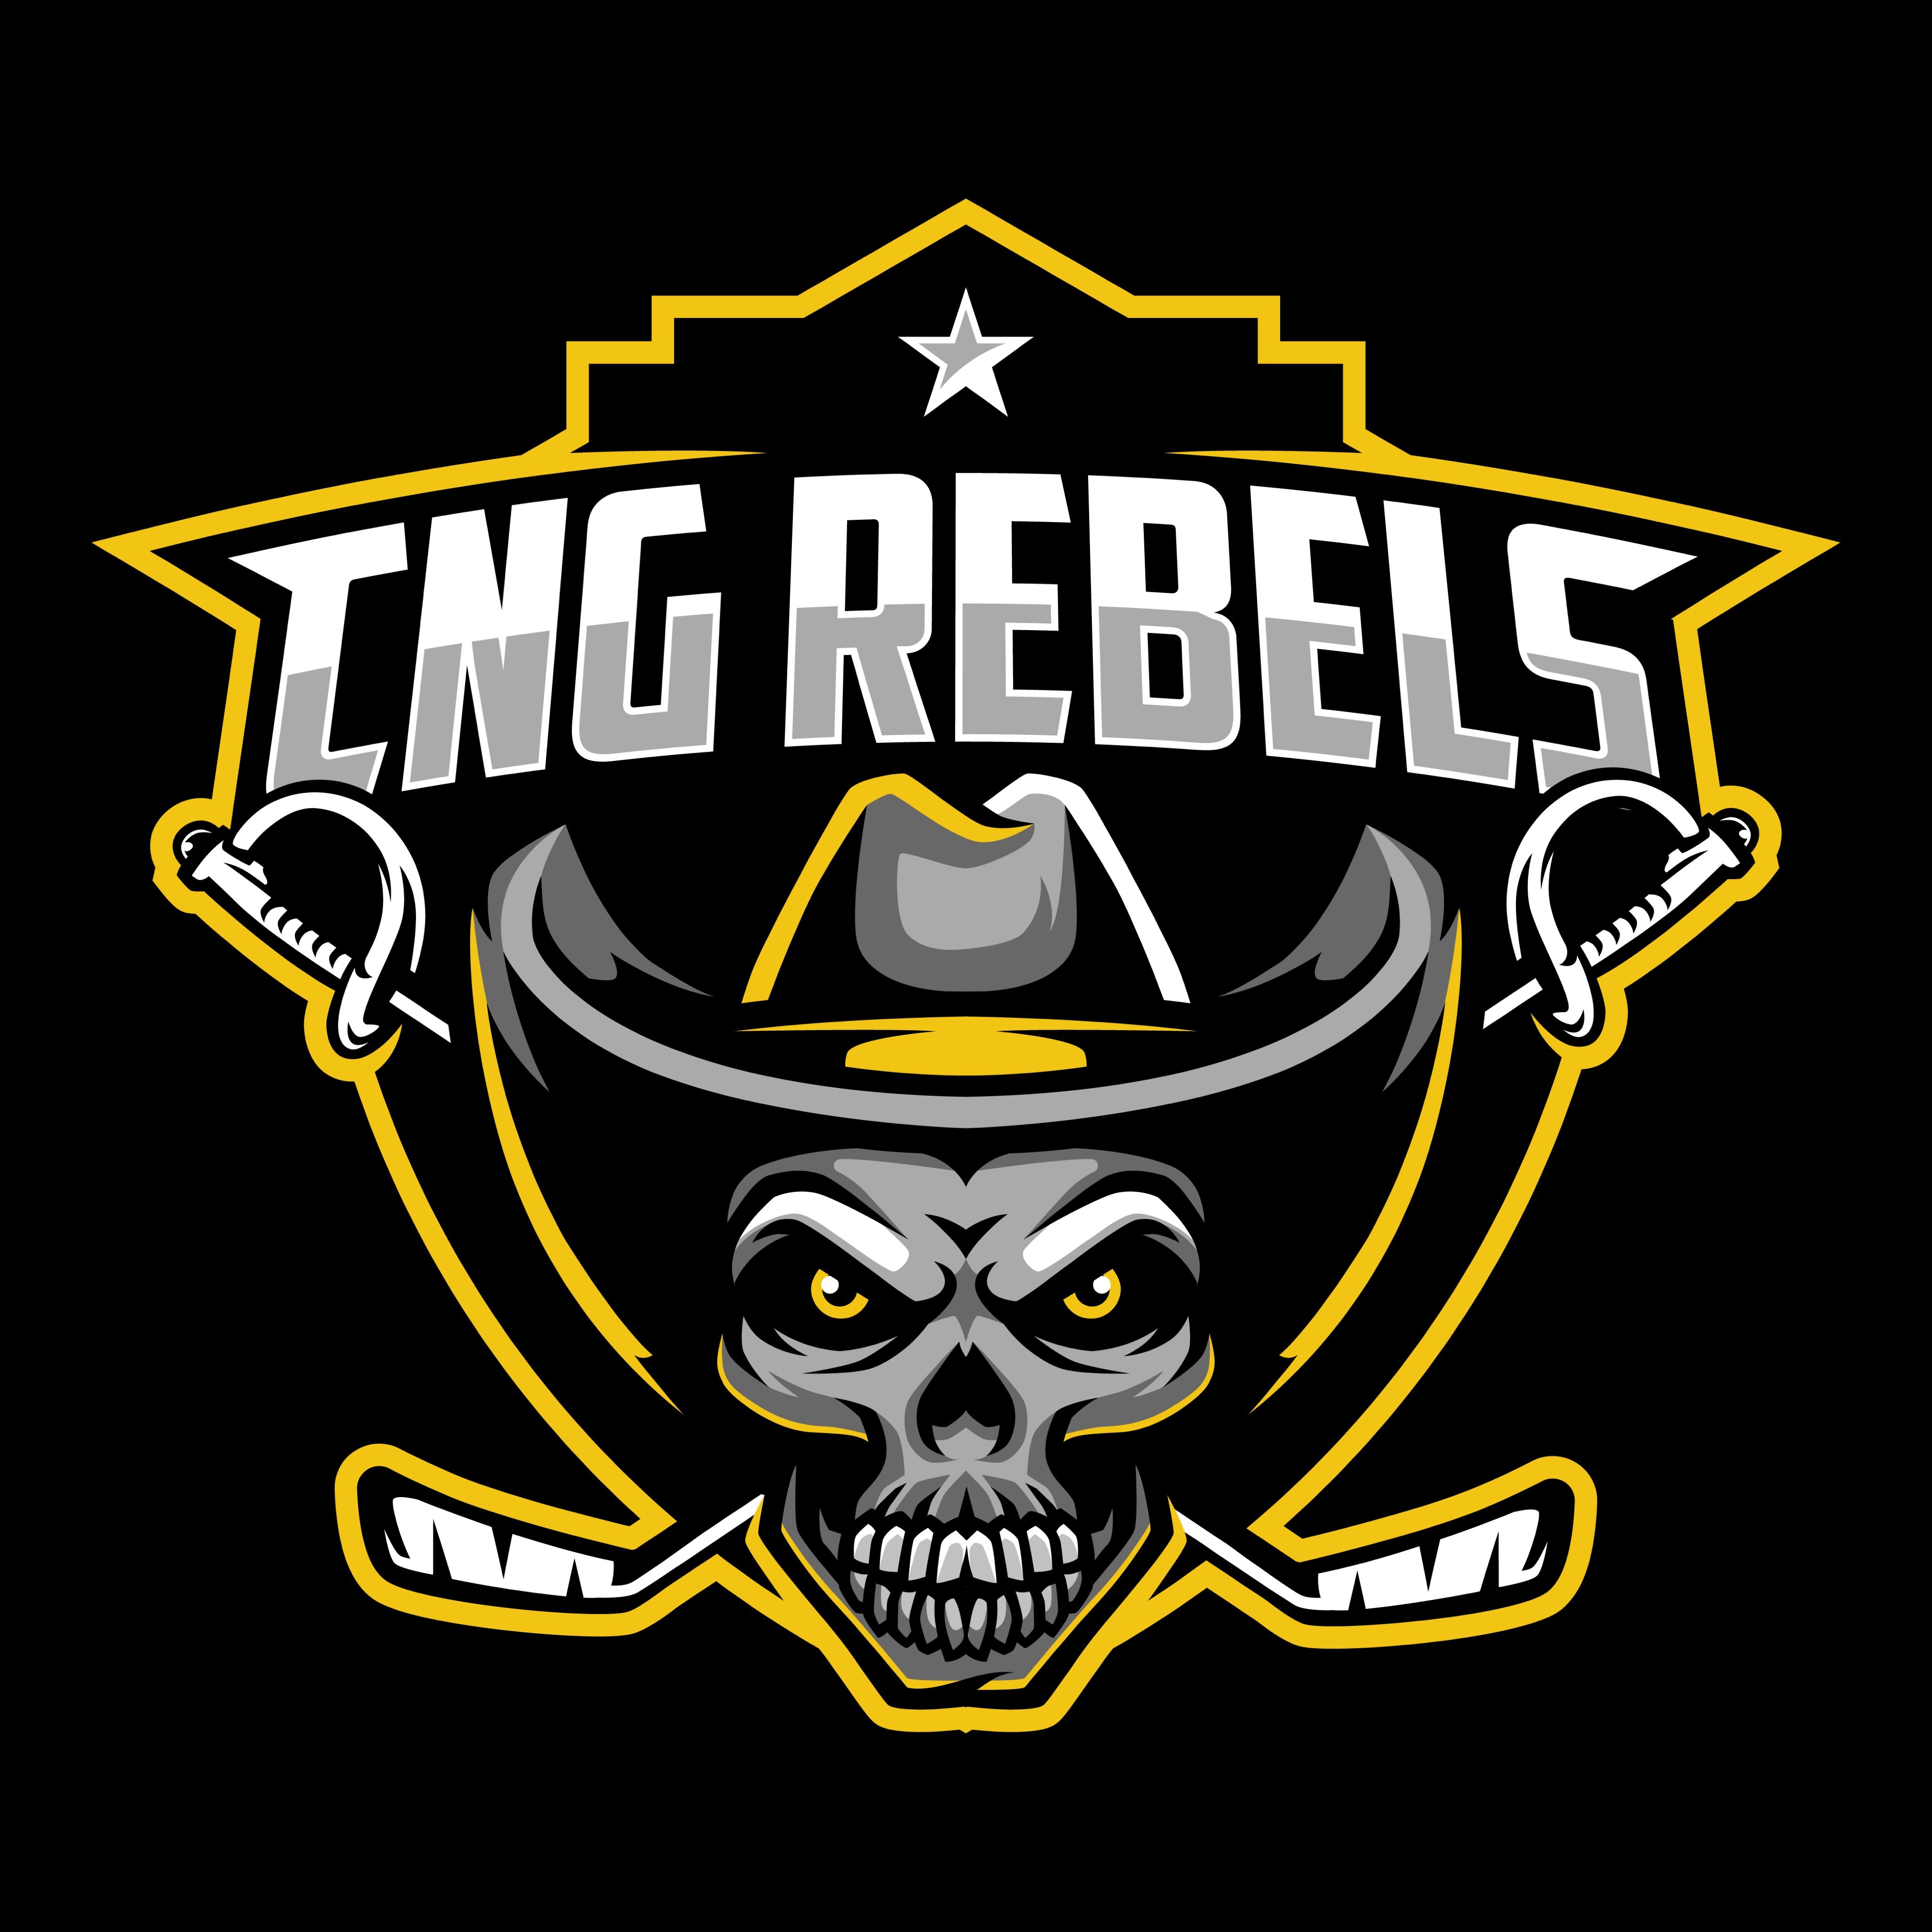 CNG Rebels is a member of the HSL. Based out of GP Ab our agenda is to provide a high quality, non threatening atmosphere for elite hockey talent.